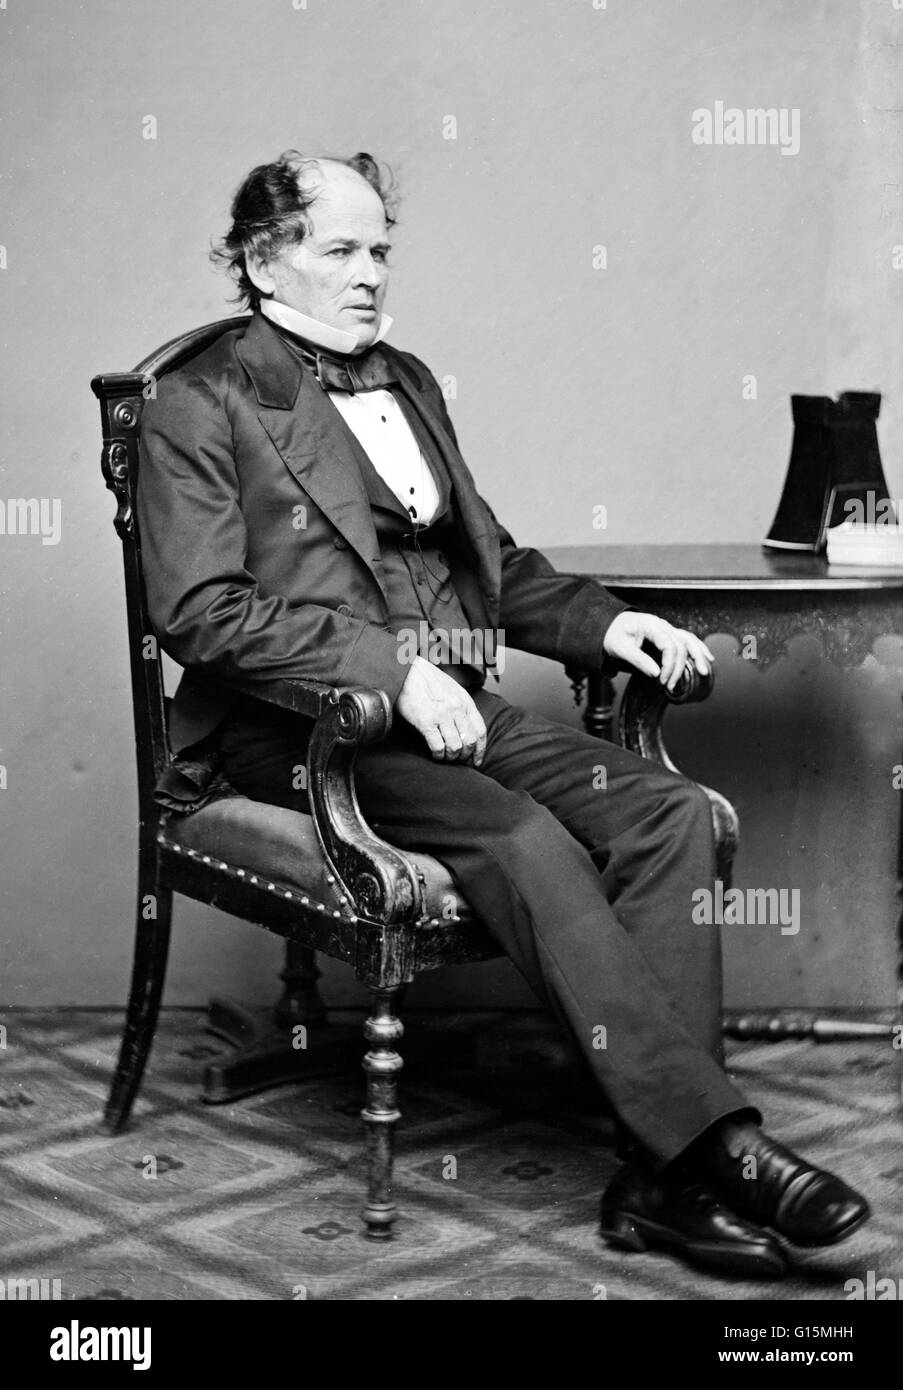 Matthew Fontaine Maury ((January 14, 1806 - February 1, 1873) was an American astronomer, historian, oceanographer, meteorologist, cartographer, author, geologist, and educator. He was nicknamed 'Pathfinder of the Seas' and 'Father of Modern Oceanography Stock Photo